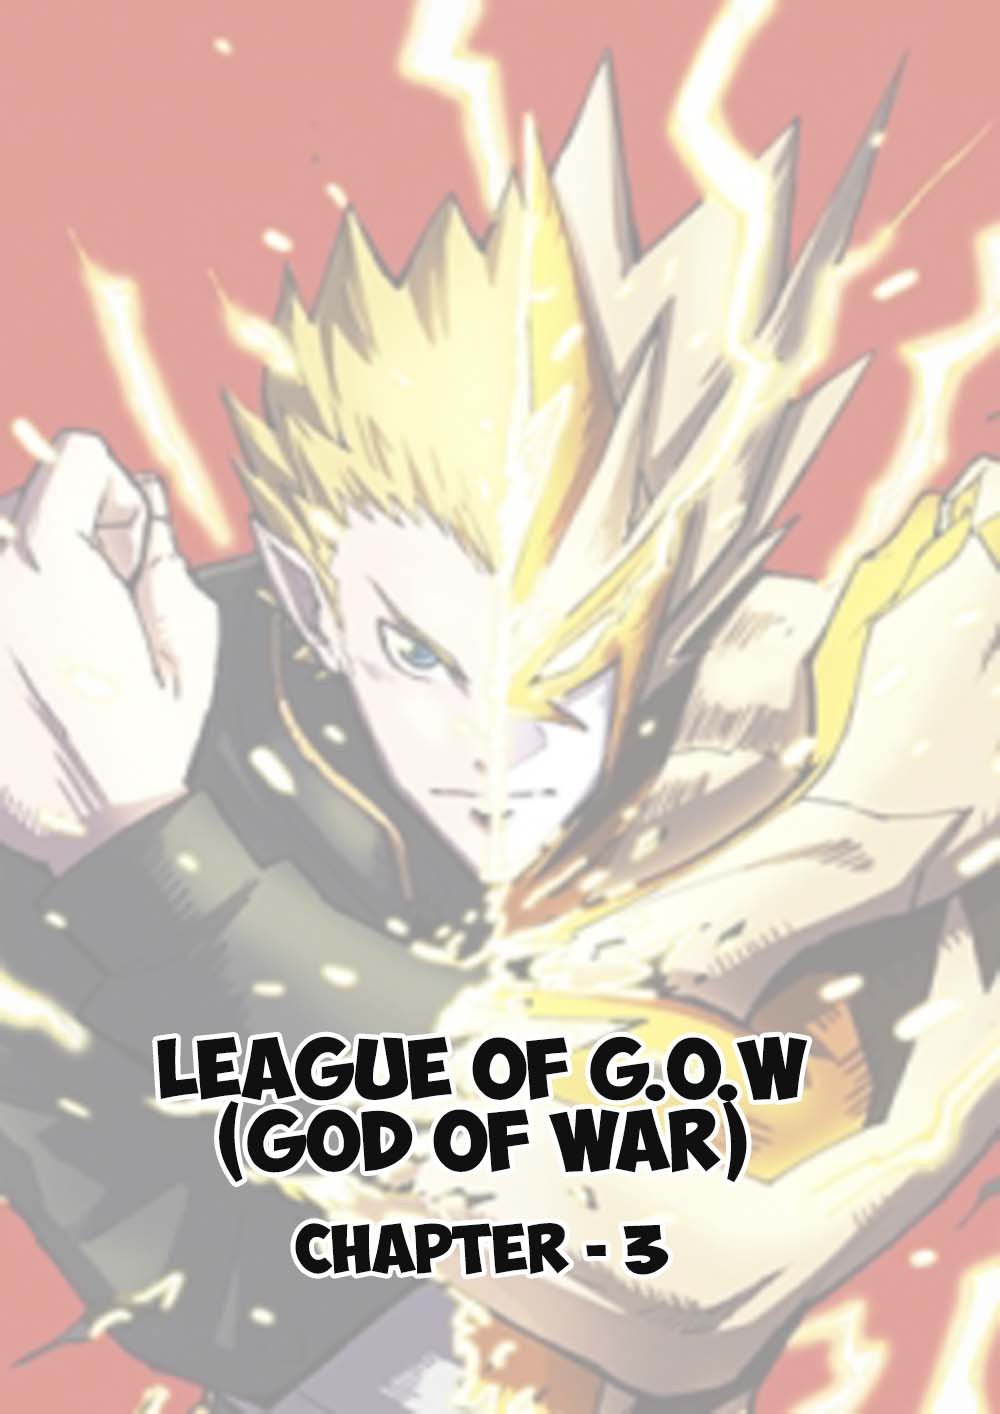 LEAGUE OF G.O.W (GOD OF WAR) Chapter 03